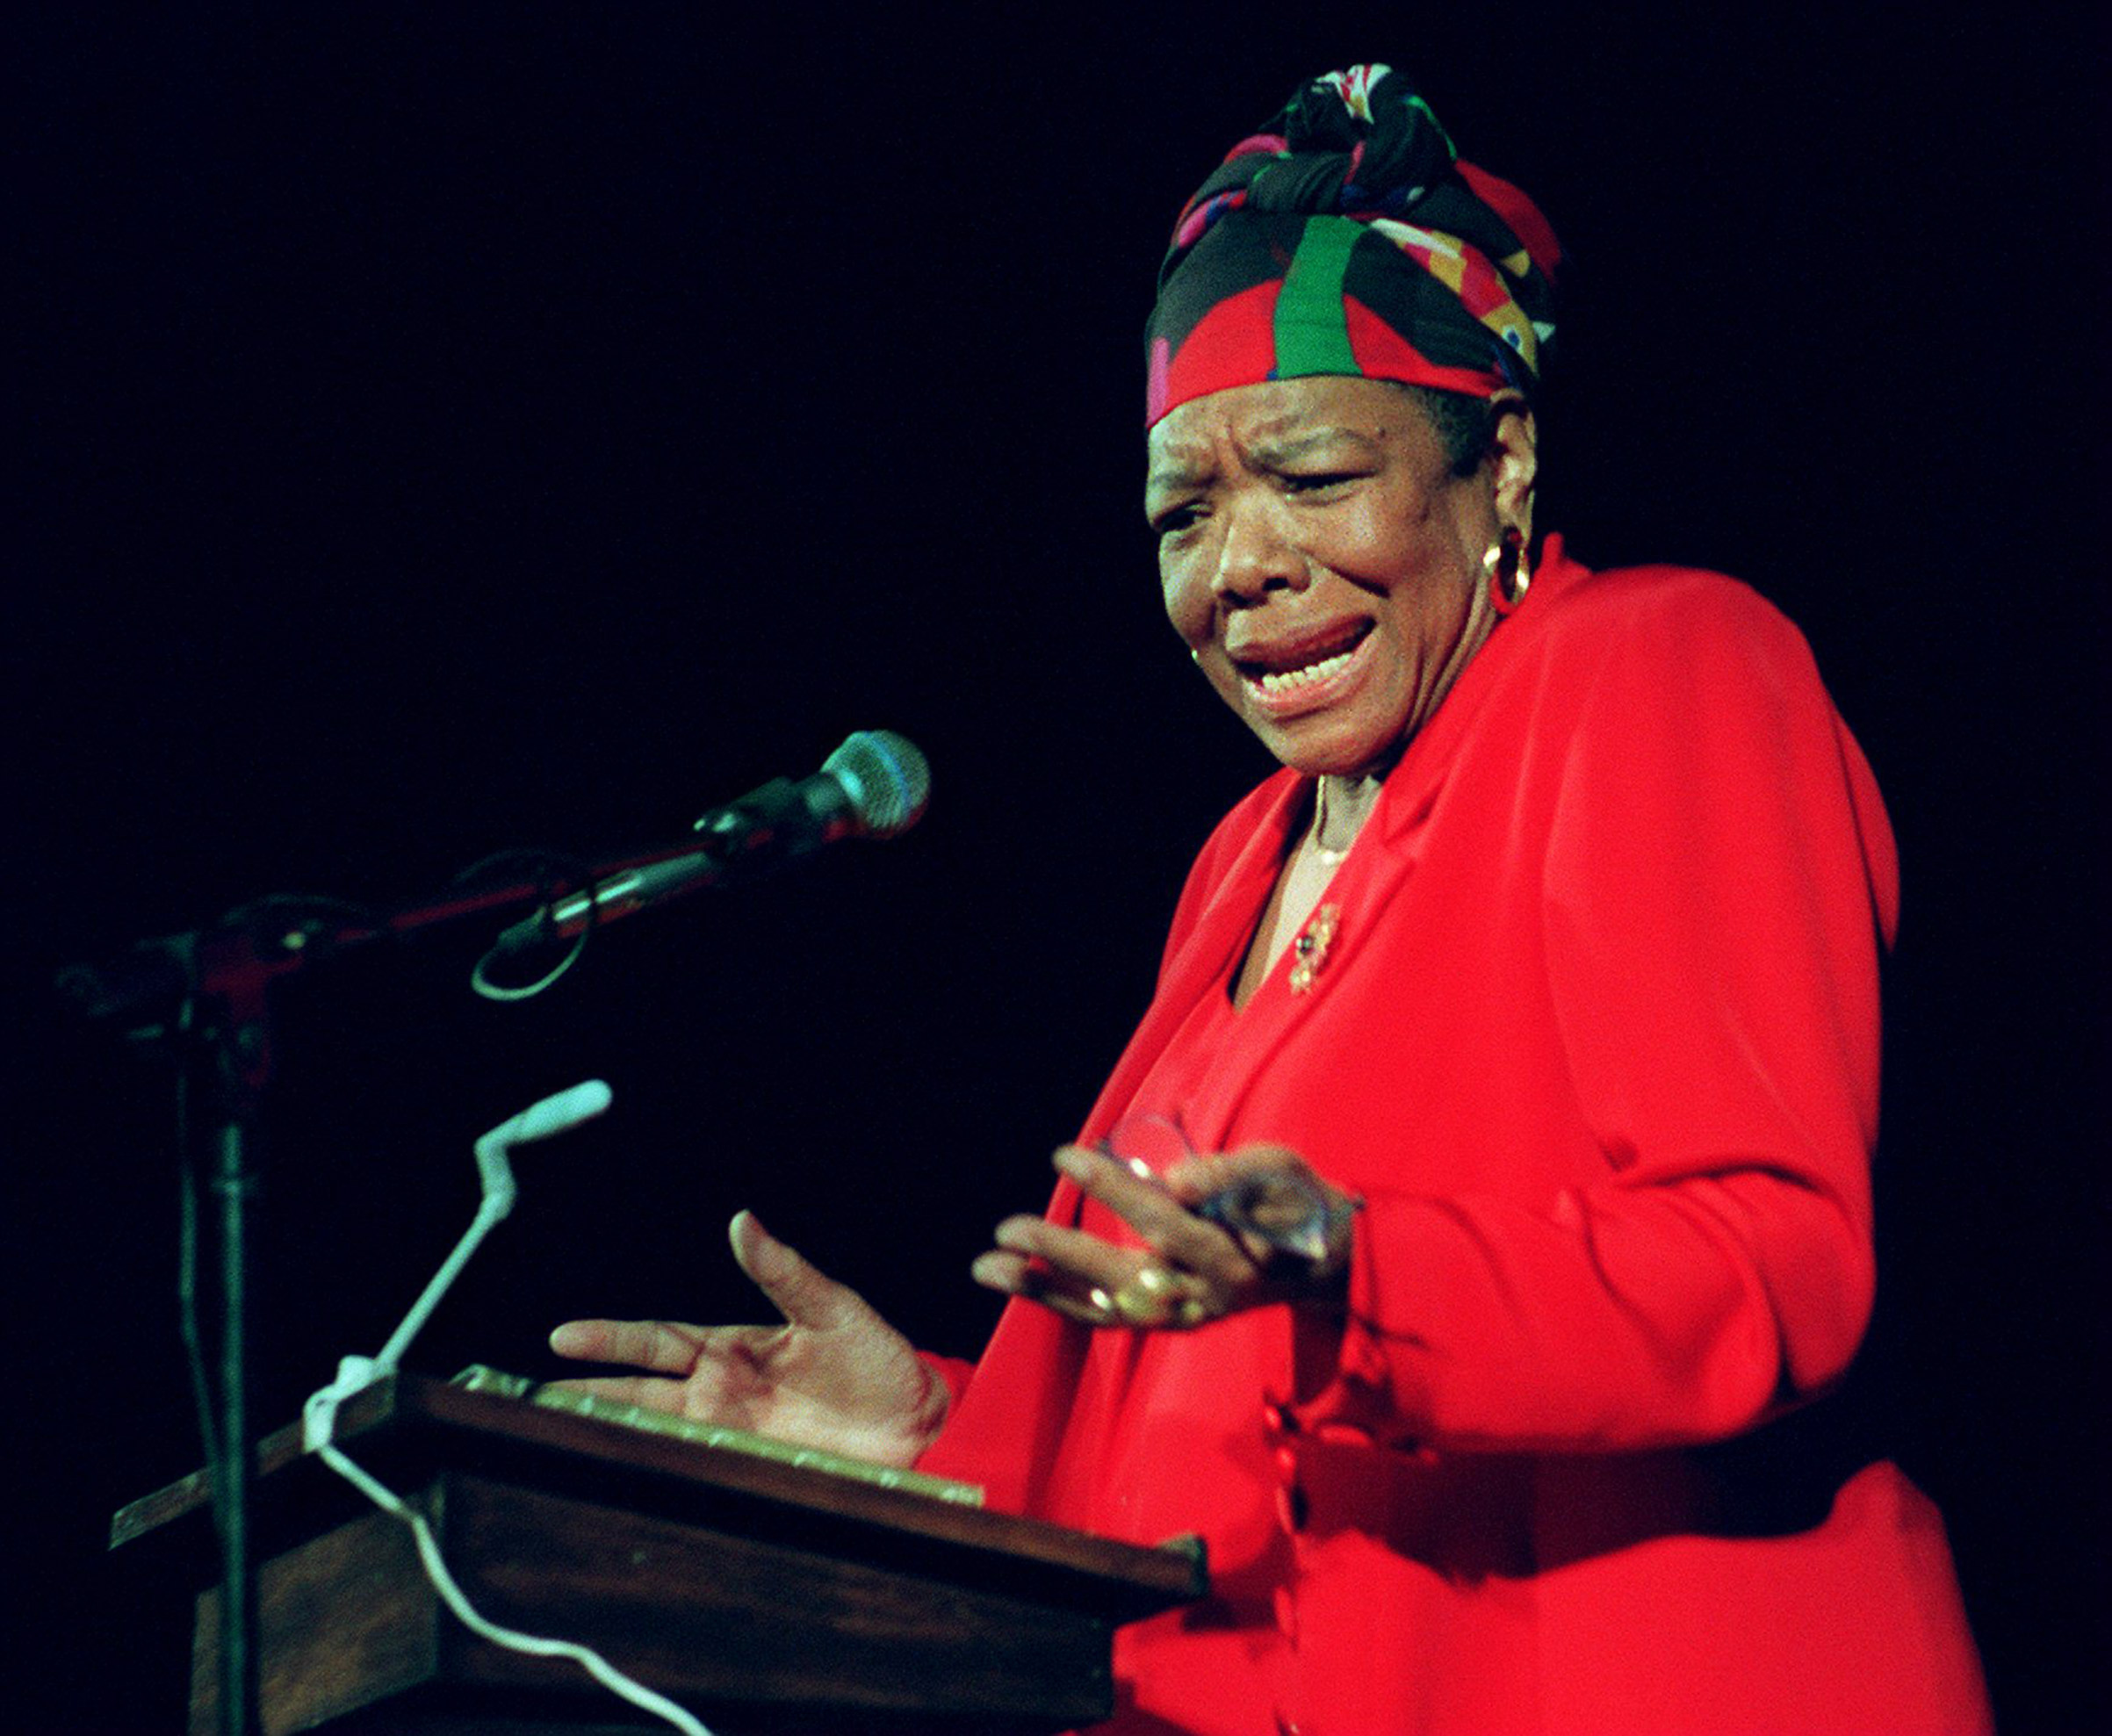 Maya Angelou reads poetry to Tufts University students at the Somerville Theatre in Somerville, Mass. on April 28, 1997. (John Bohn/The Boston Globe—Getty Images)